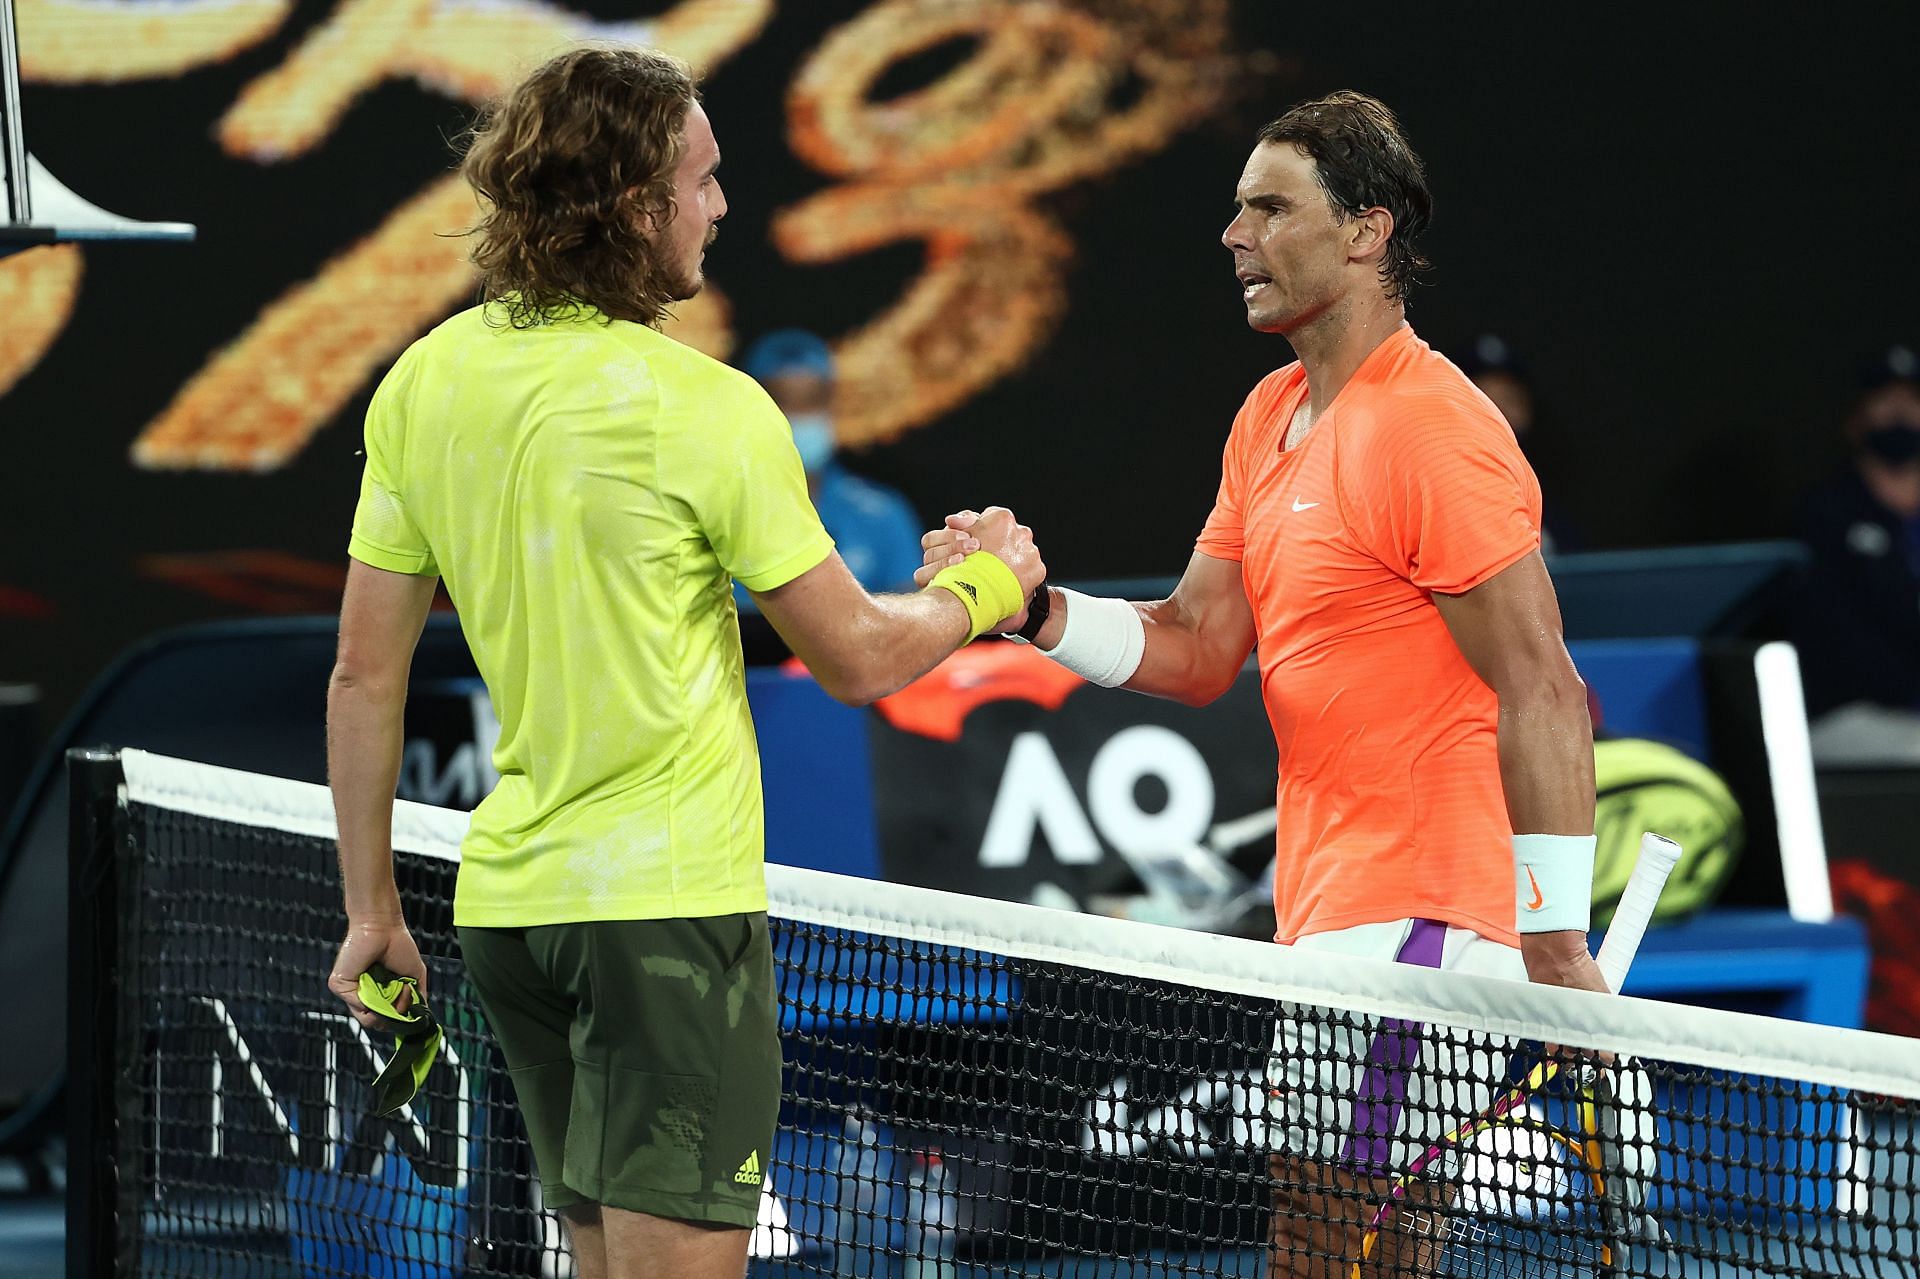 Tsitsipas staged a remarkable comeback to reach his second Australian Open semifinal